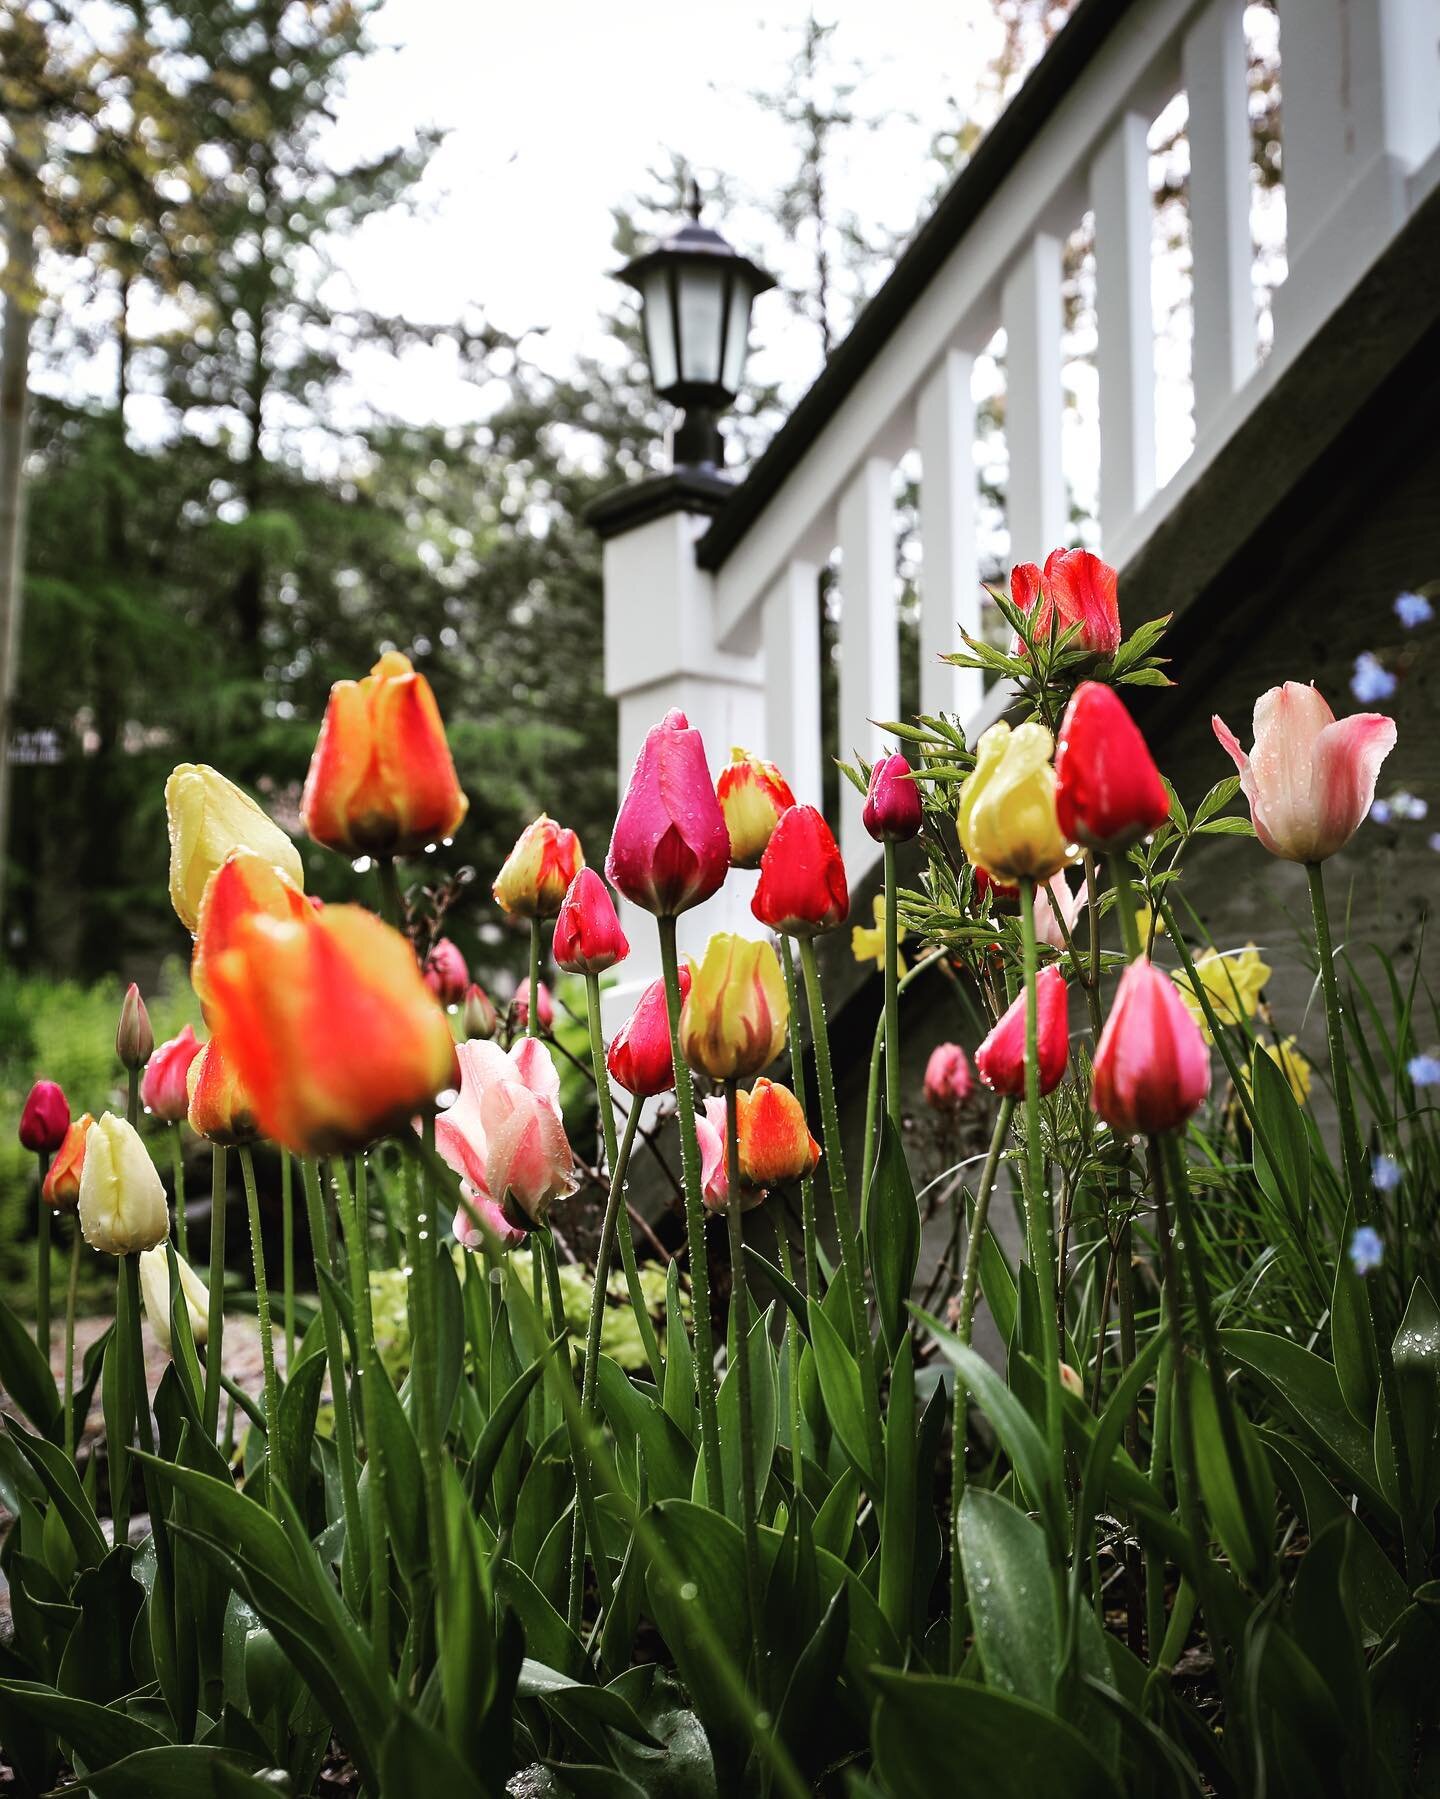 Added some brush strokes to this picture perfect house. 👩🏻&zwj;🌾

#springbulbs #brecksbulbs #floweraddicted #rossland #paintingwithflowers #westkootenays #kootrocks #uniquehotels #oneofakind #travelbc #tulips #walkingtour #gardentour #zone4b